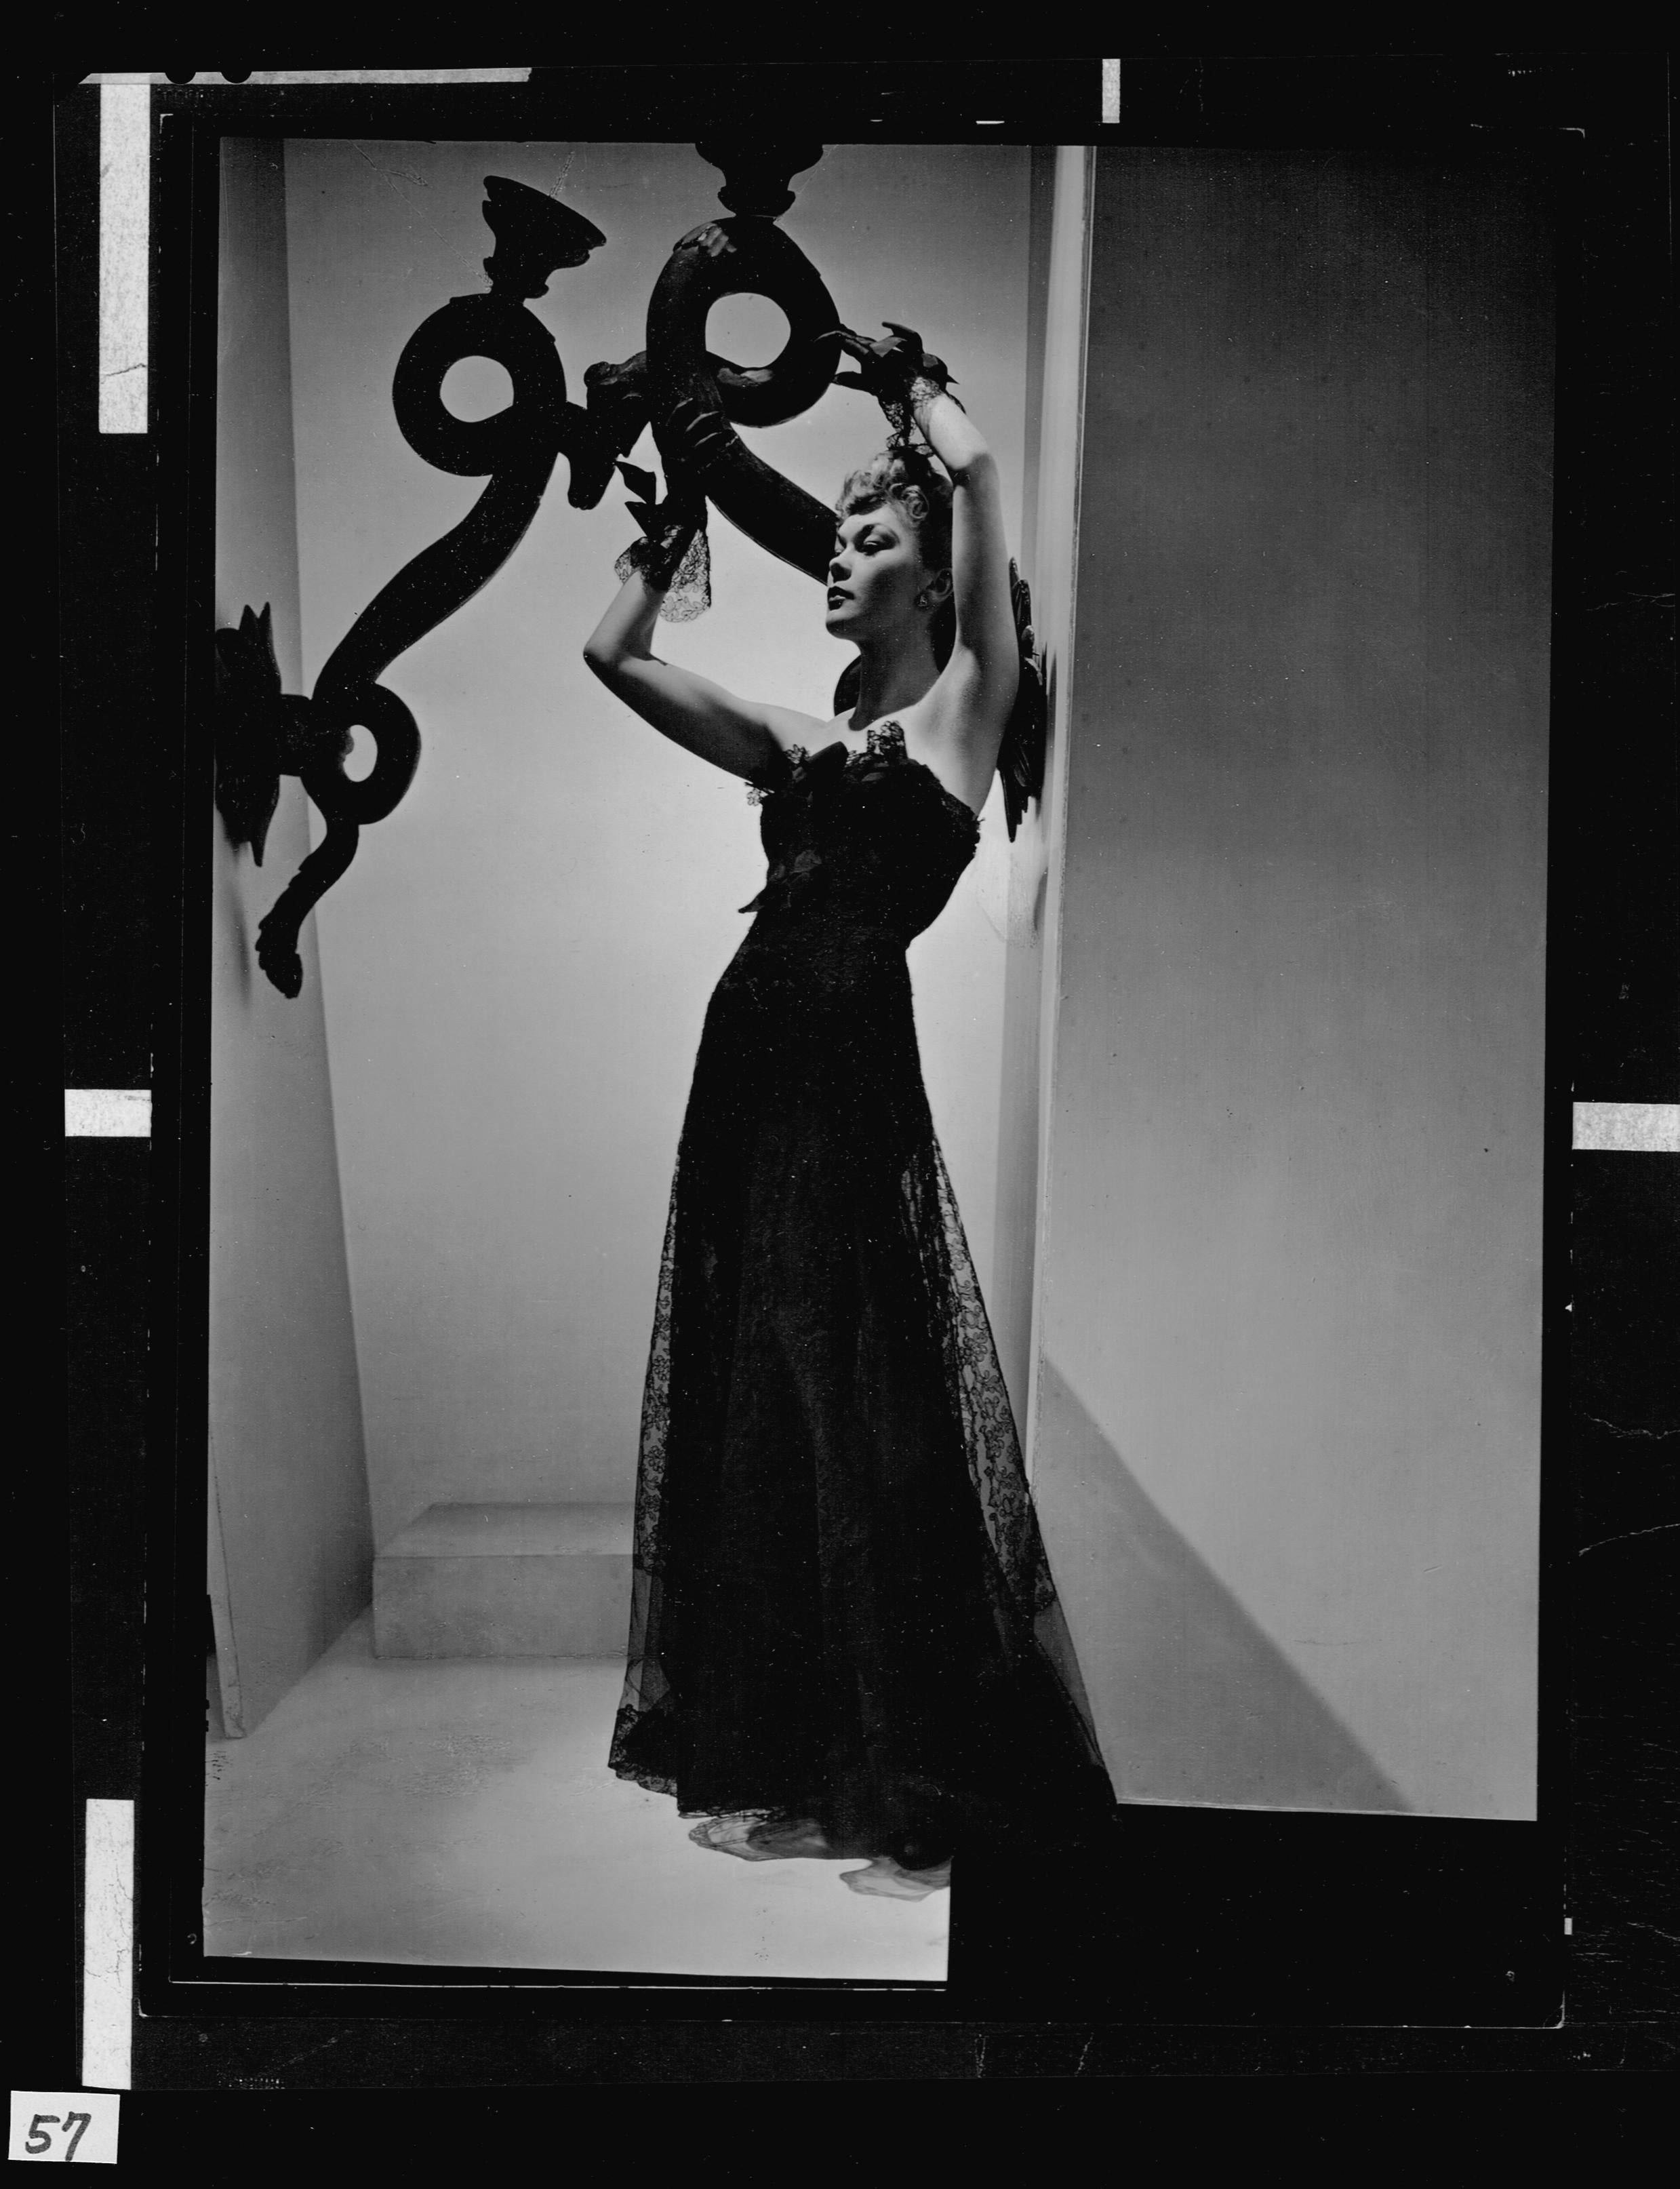 Horst P. Horst Black and White Photograph - Lud in Chanel Dress, Paris, VOGUE